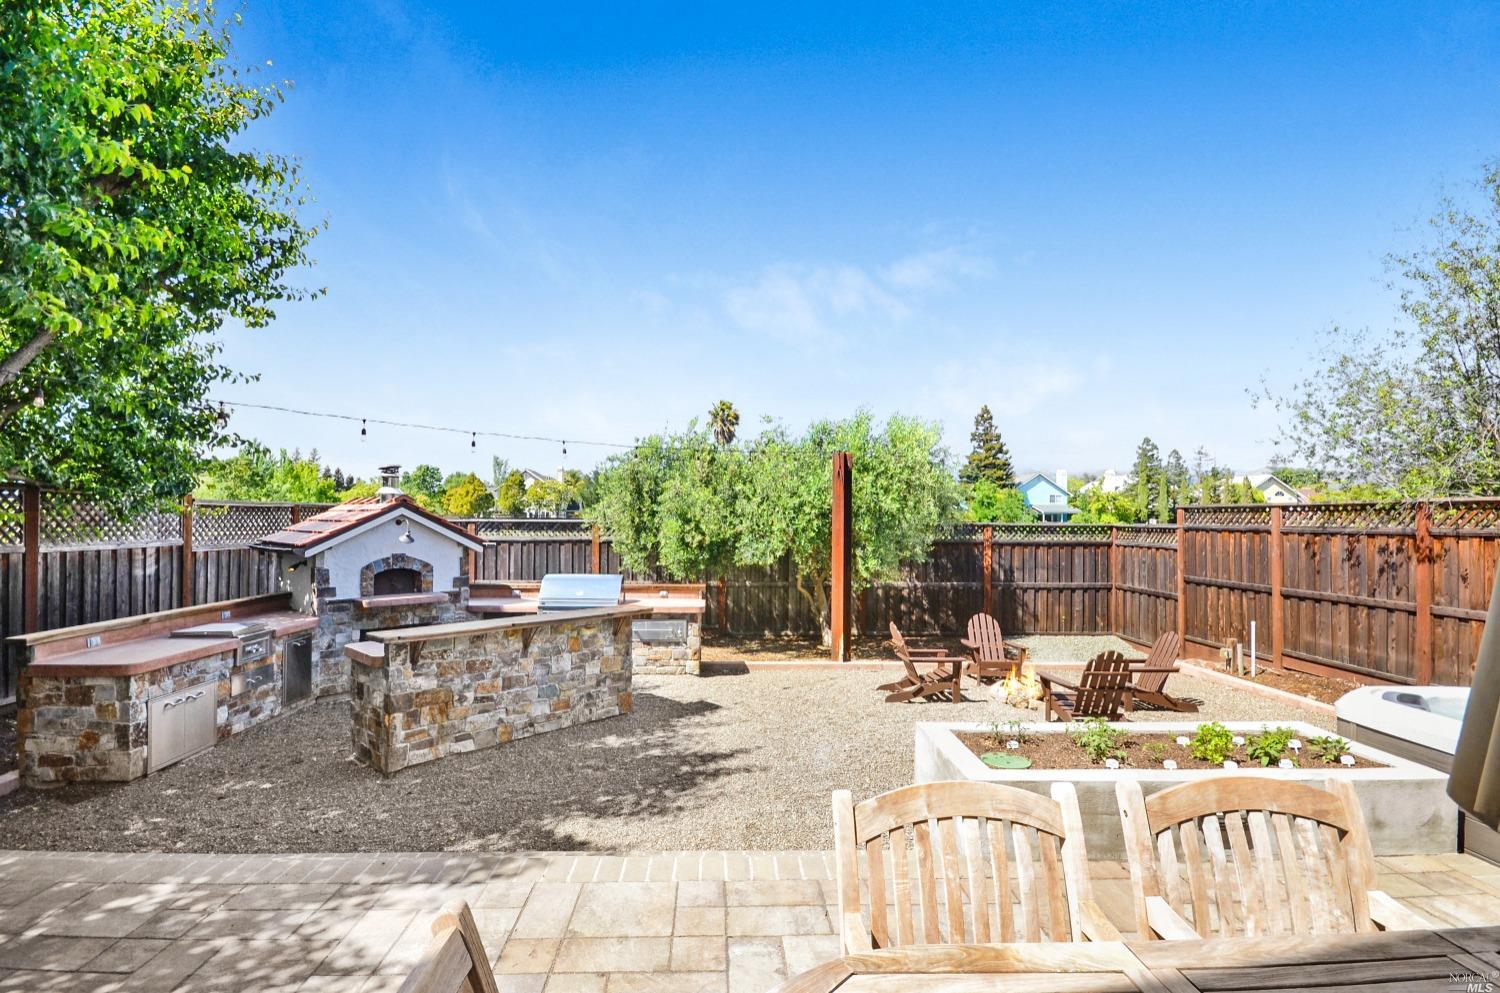 Backyard over looking the custom kitchen and fire pit. Don't miss the open views